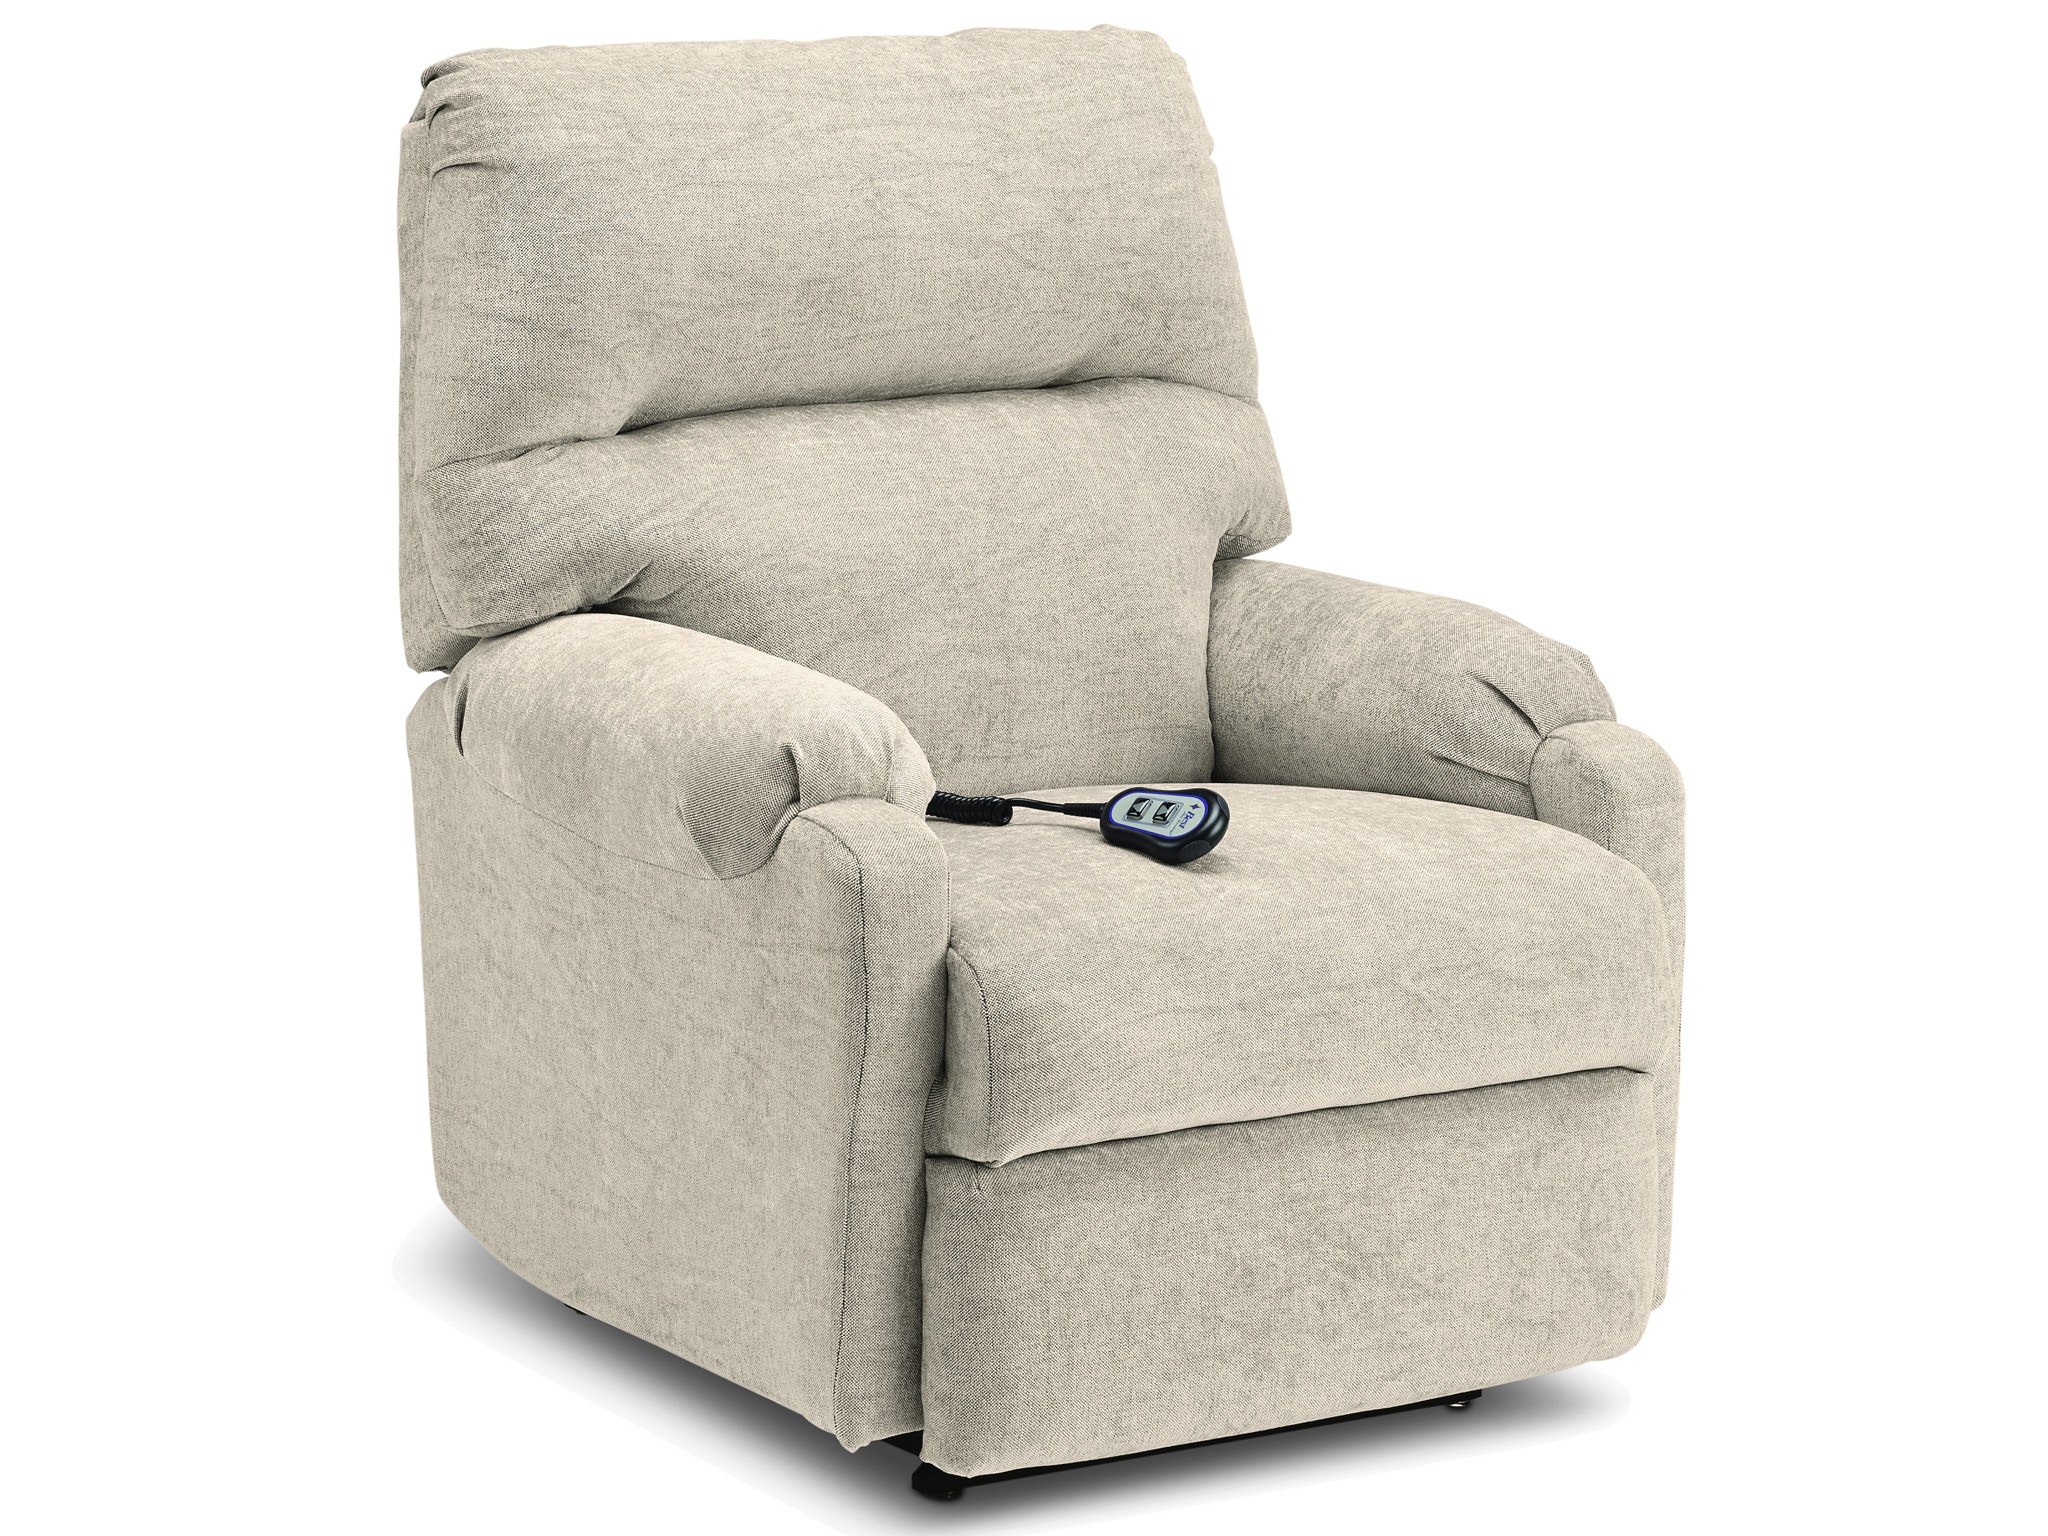 Best Home Furnishings Living Room Recliner 1AW31 - Ross Furniture 